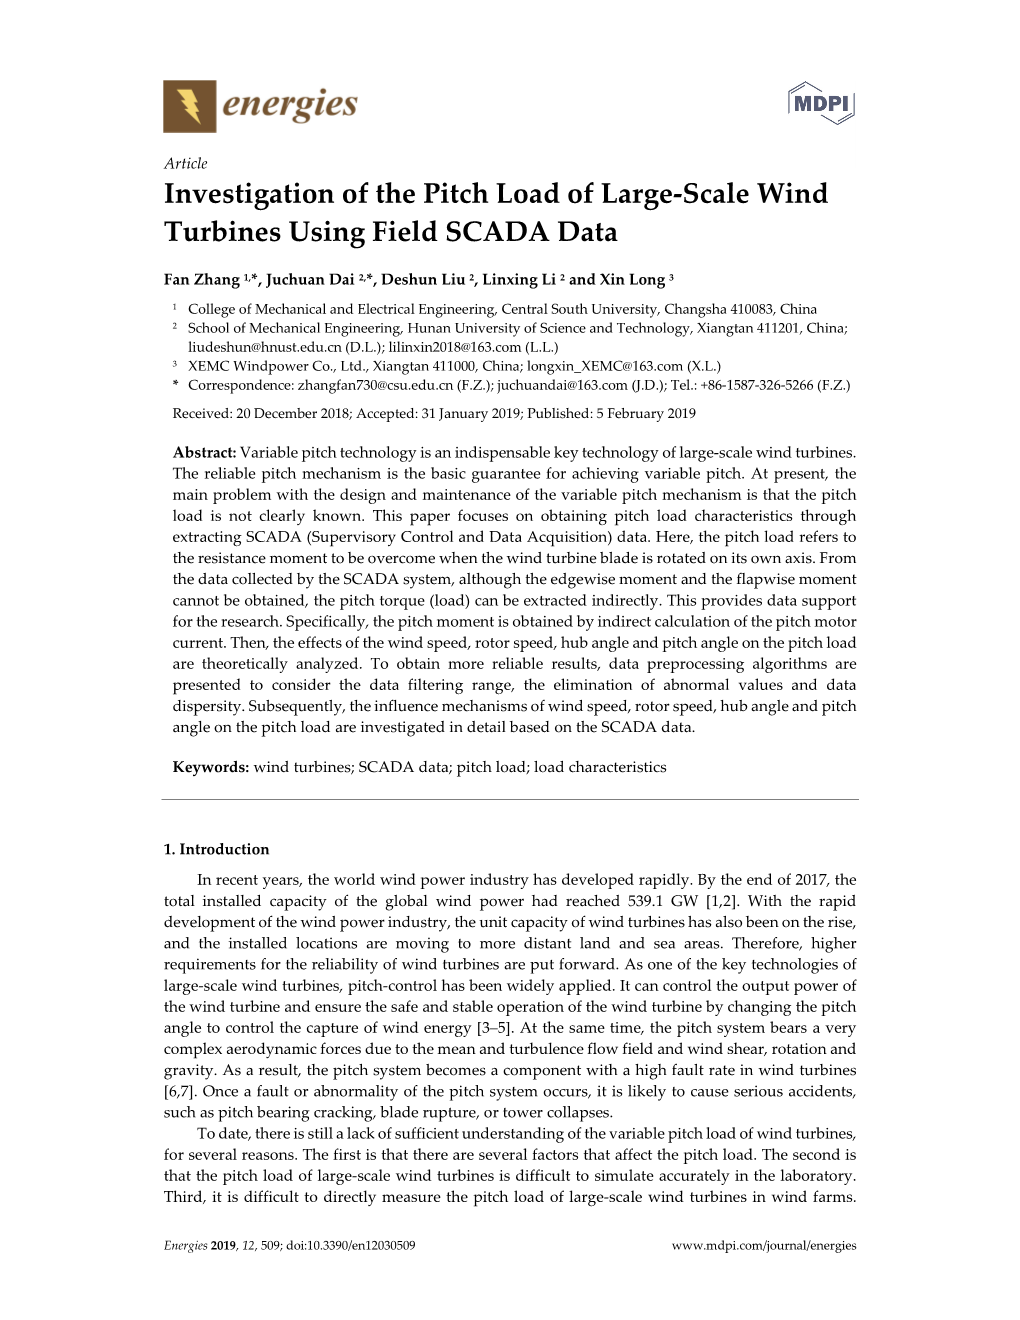 Investigation of the Pitch Load of Large-Scale Wind Turbines Using Field SCADA Data